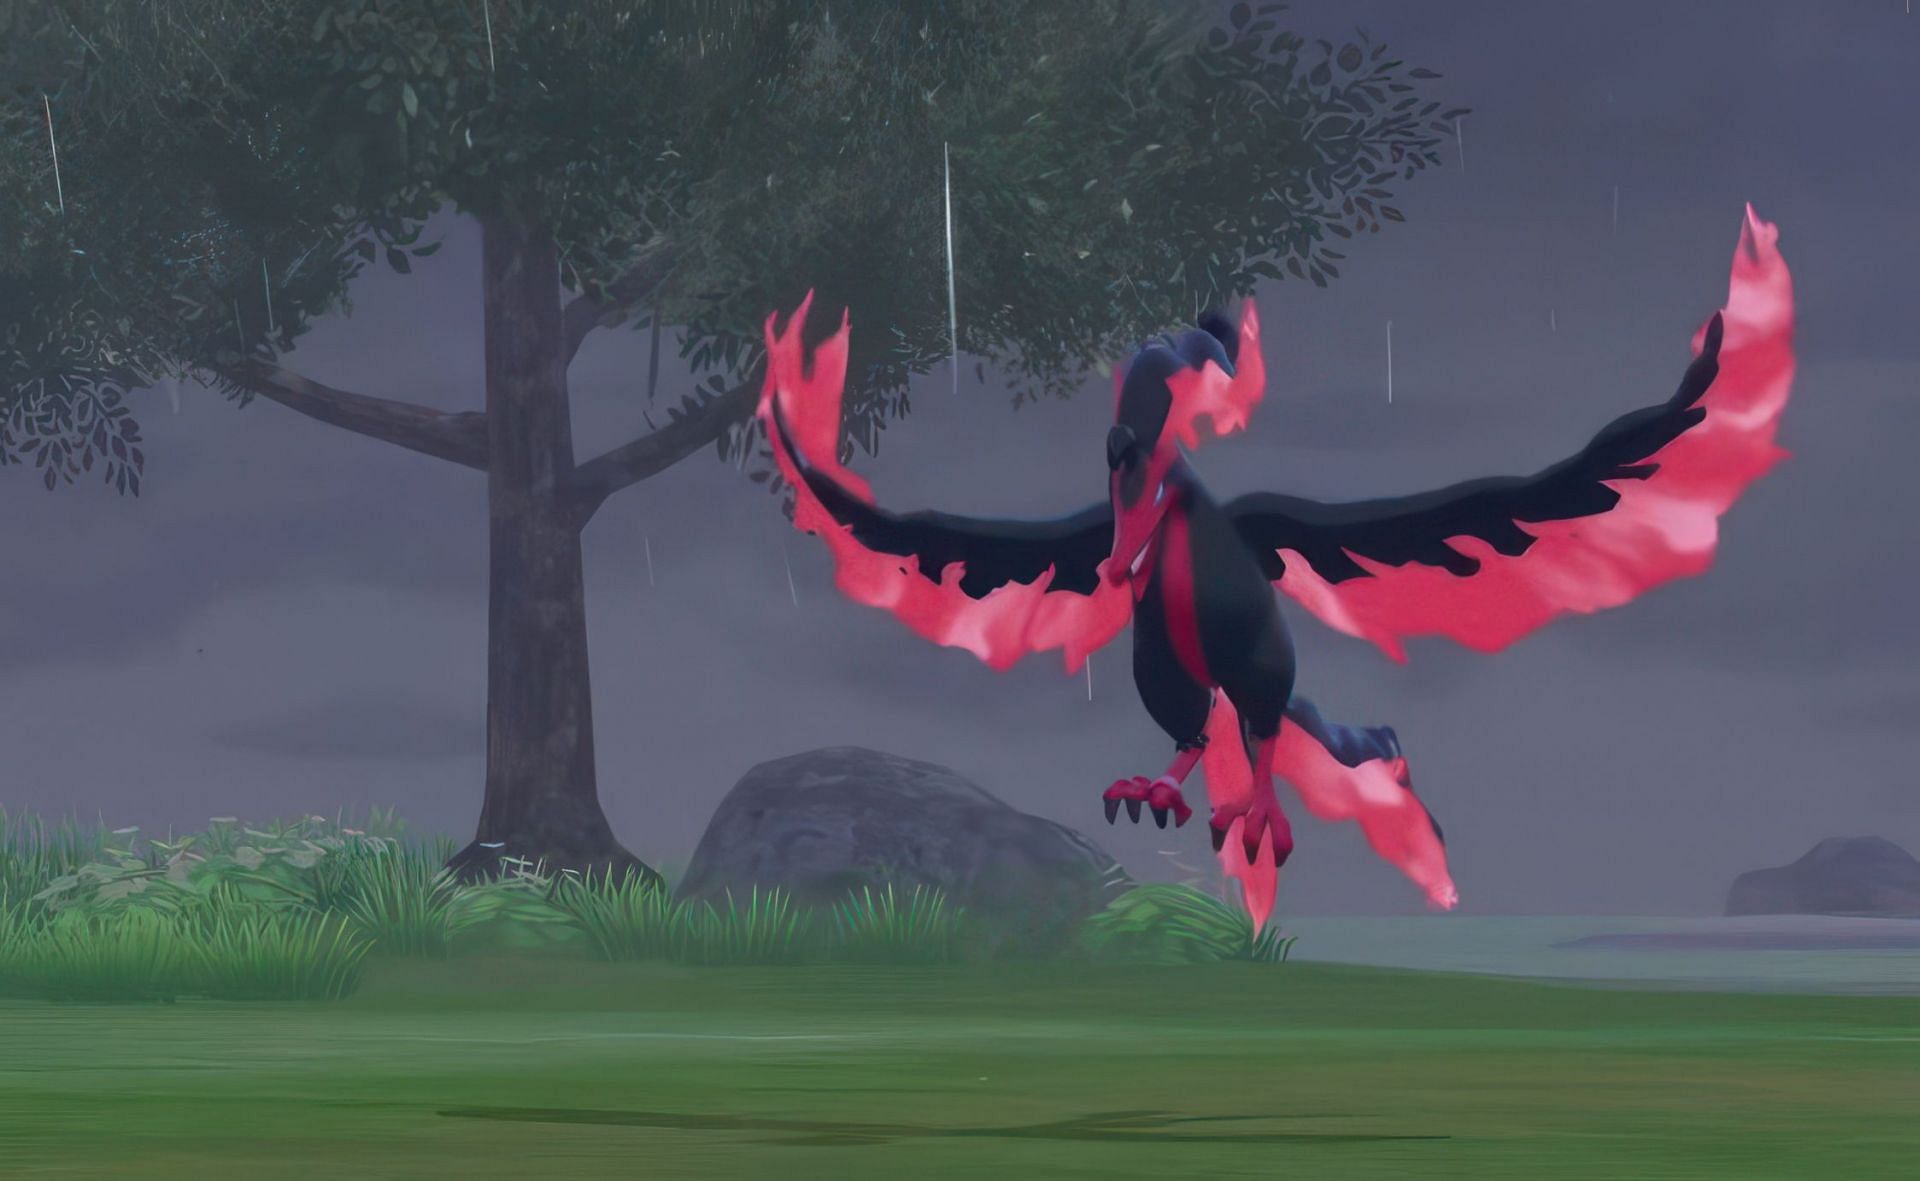 Pokemon GO Galarian Zapdos PvP and PvE guide: Best moveset, counters, and  more